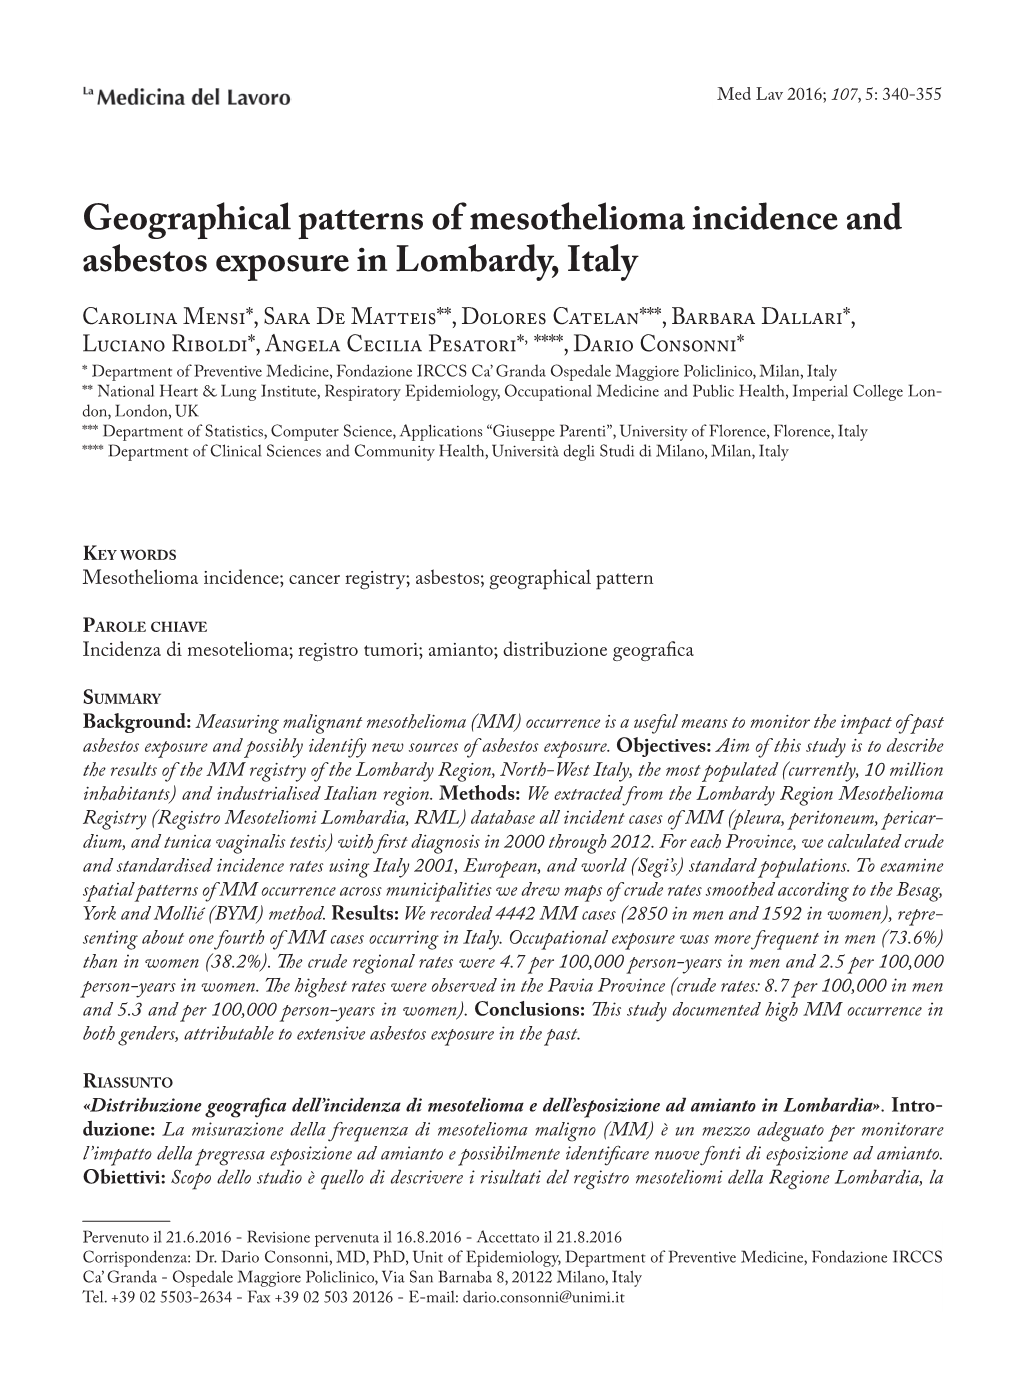 Geographical Patterns of Mesothelioma Incidence And